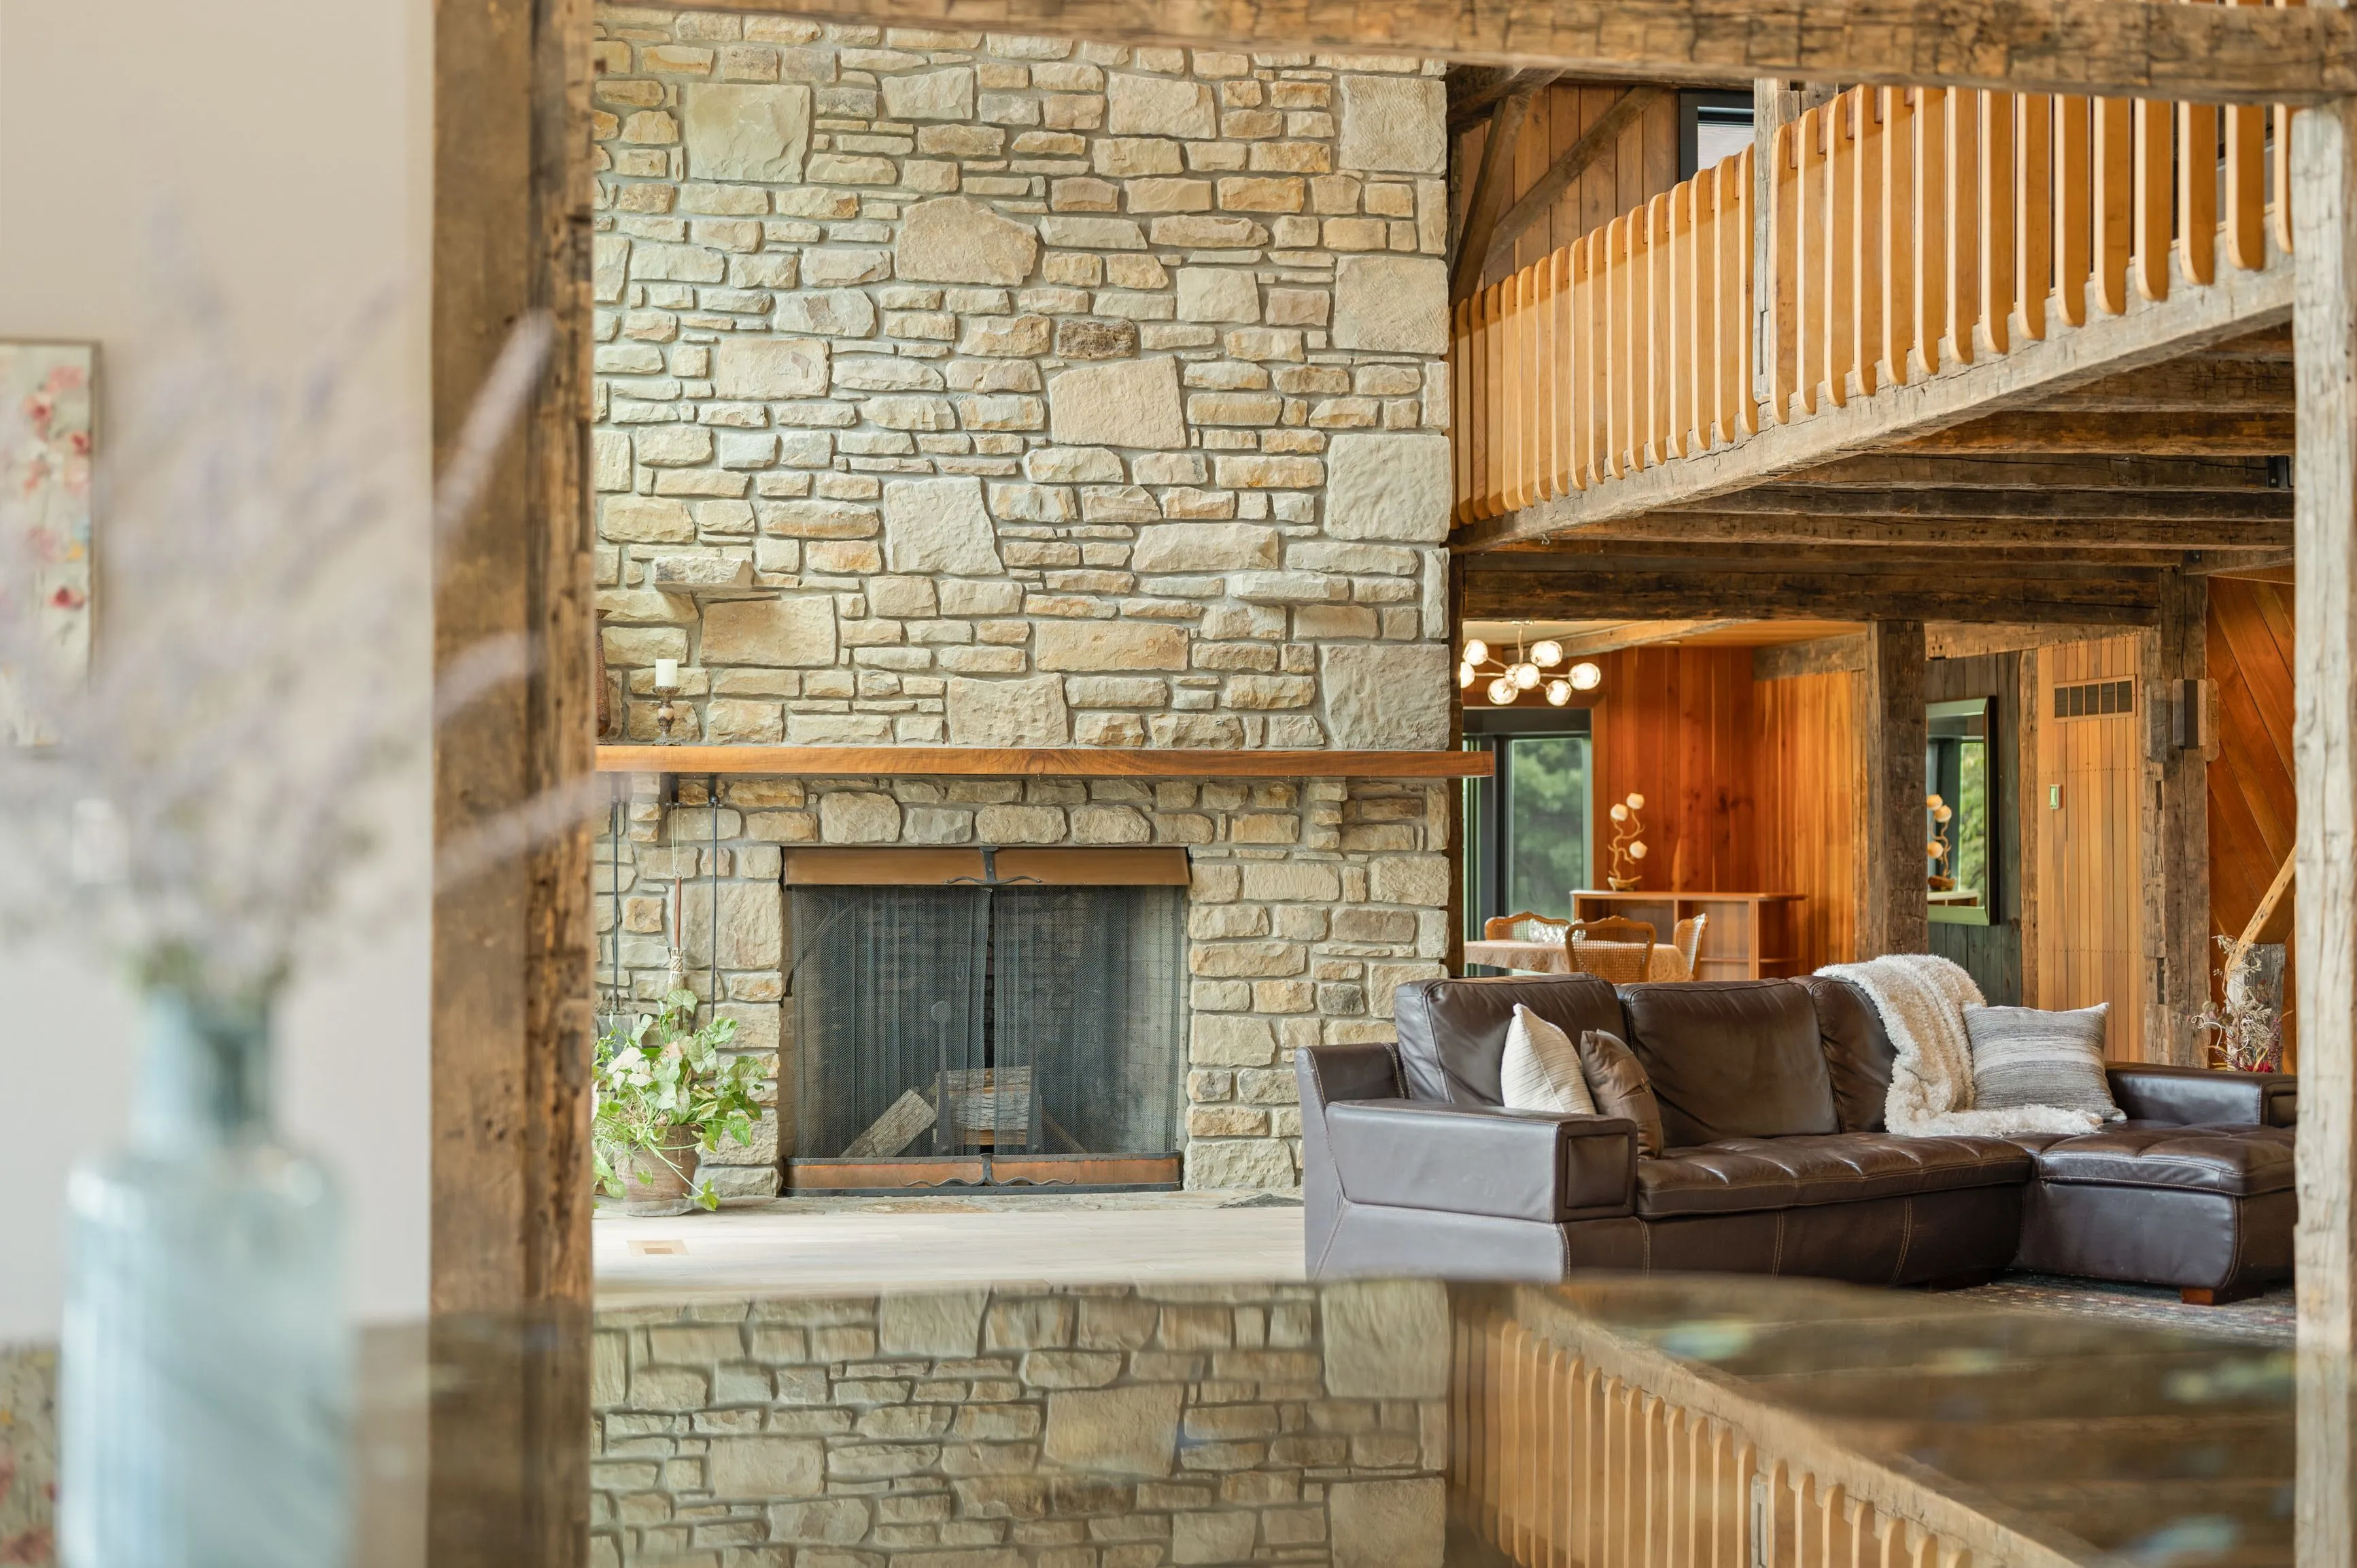 Rustic living room interior with stone fireplace, wooden beams, and leather sofa set.